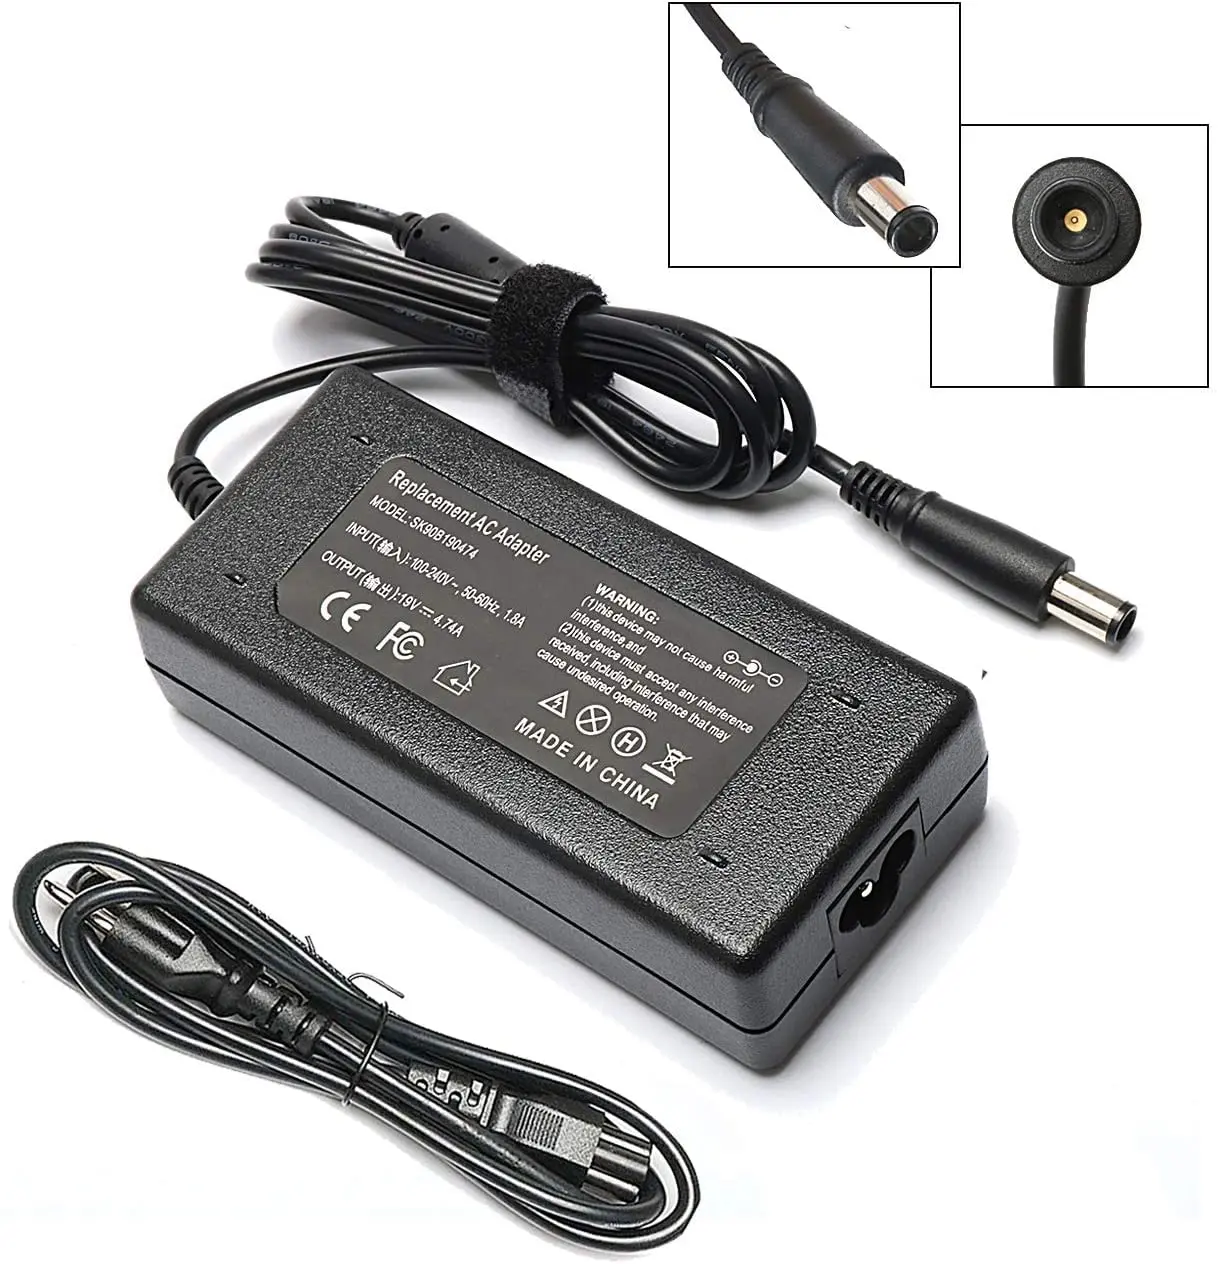 power cord for hewlett packard elitebook 8470p - What size pin is the HP Elitebook 8470p charger